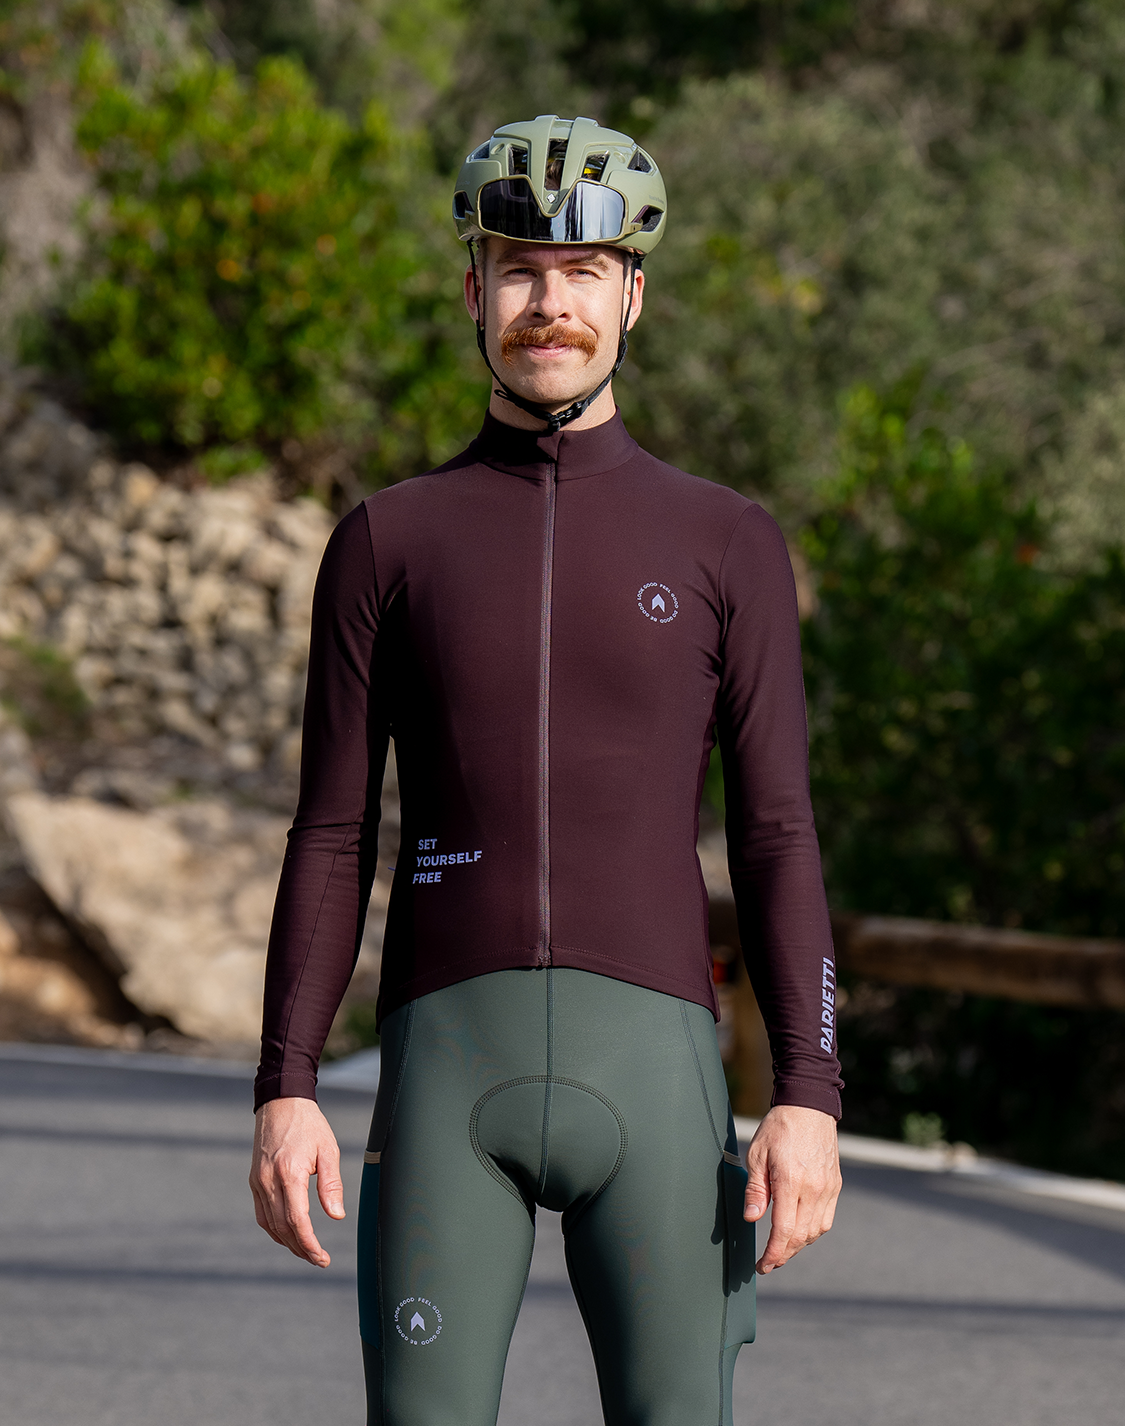 Men's Set Yourself Free Thermal Jersey — Winter Berry